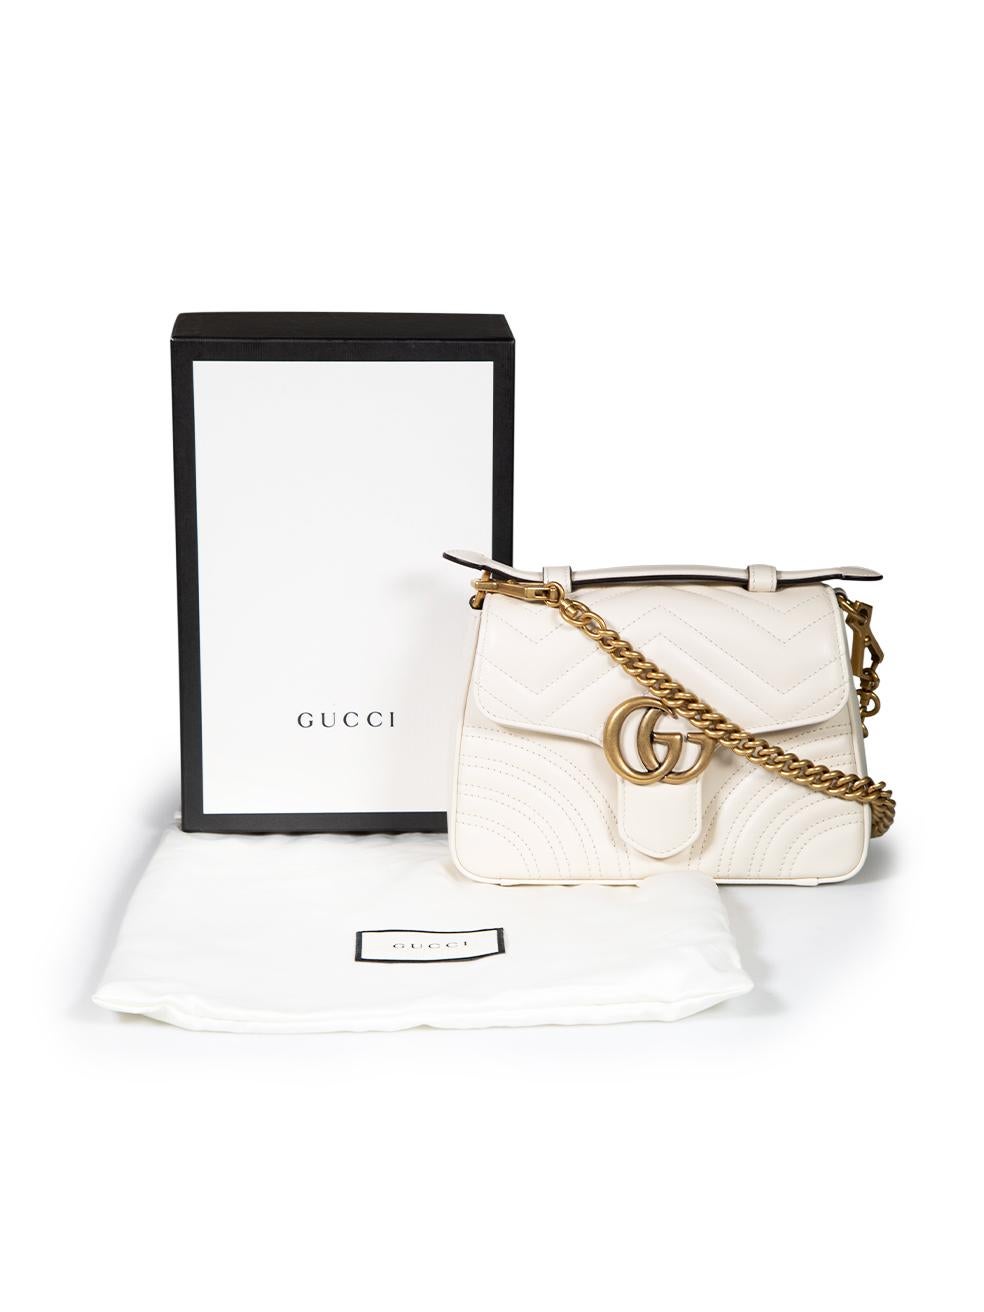 Gucci White Leather Matelasse Mini GG Marmont Top Handle Bag For Sale 3